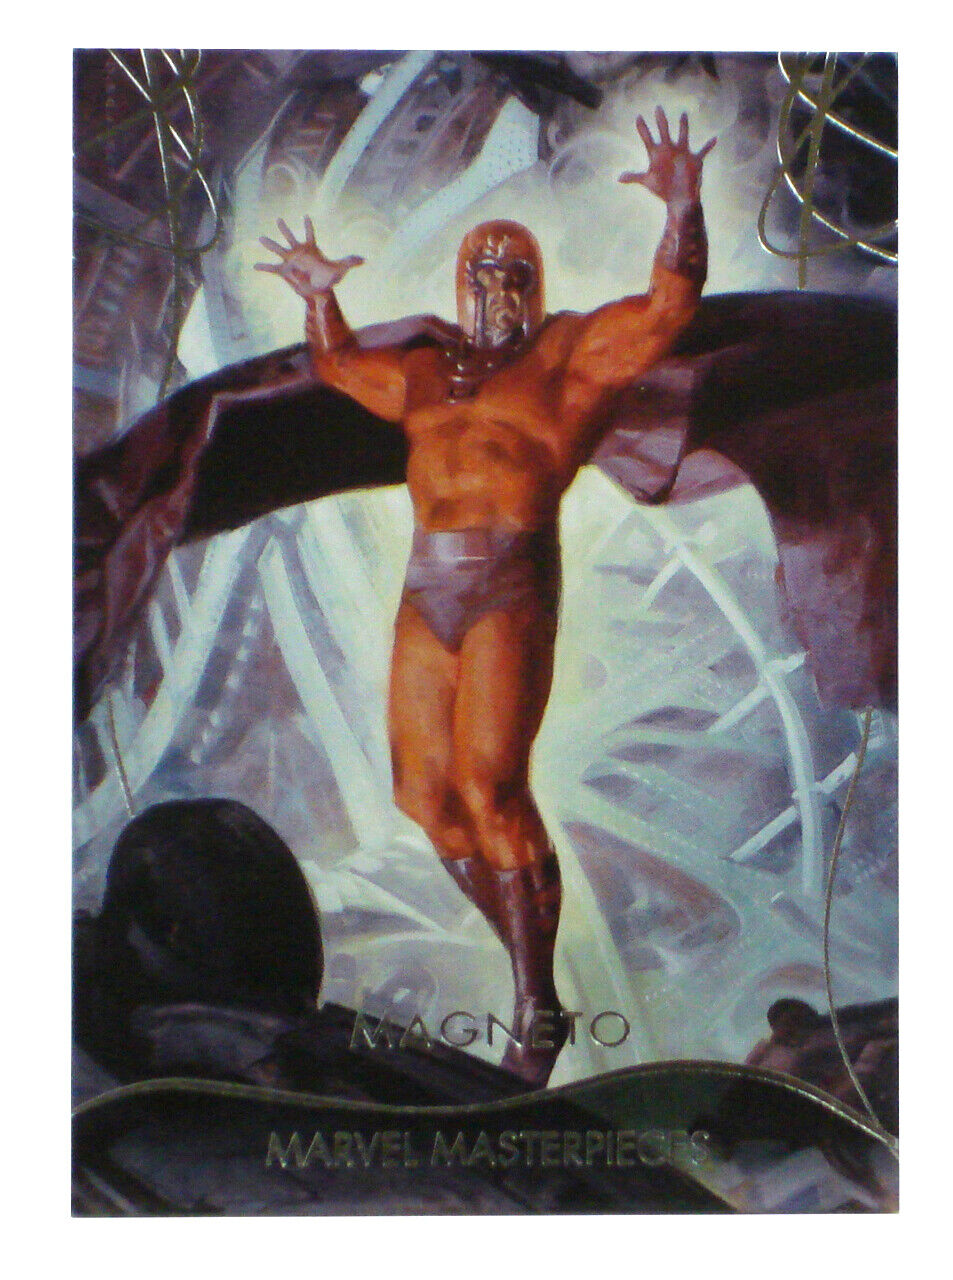 2020 Upper Deck Marvel Masterpieces Magneto Base Card #48 Dave Palumbo 108/1499